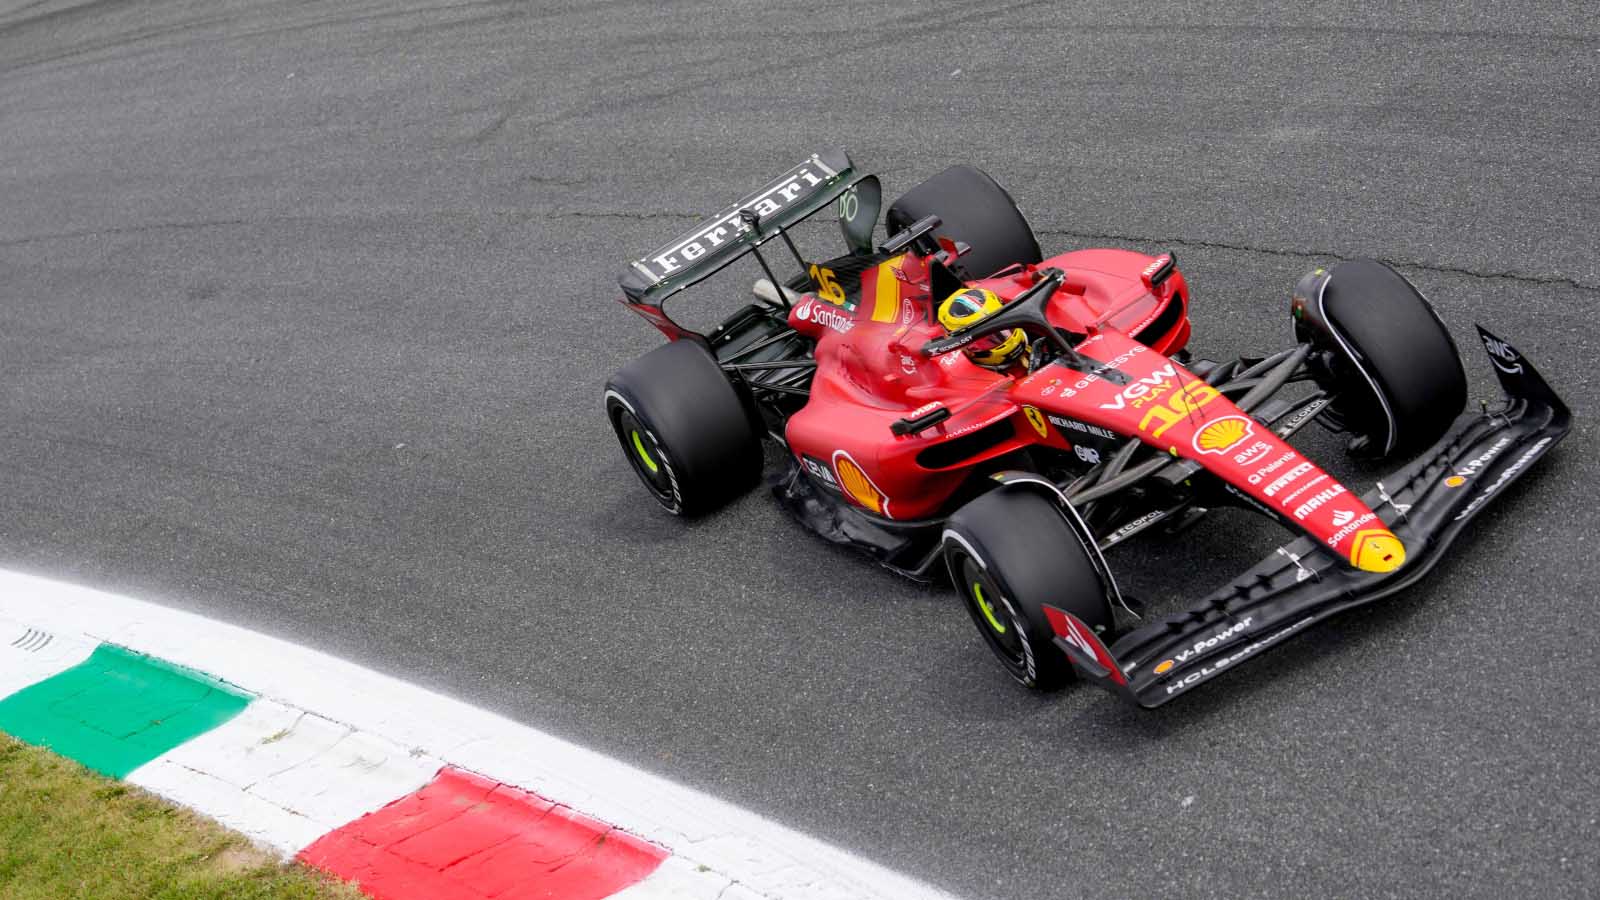 F1 – Leclerc leads Ferrari one-two in first practice at Monza